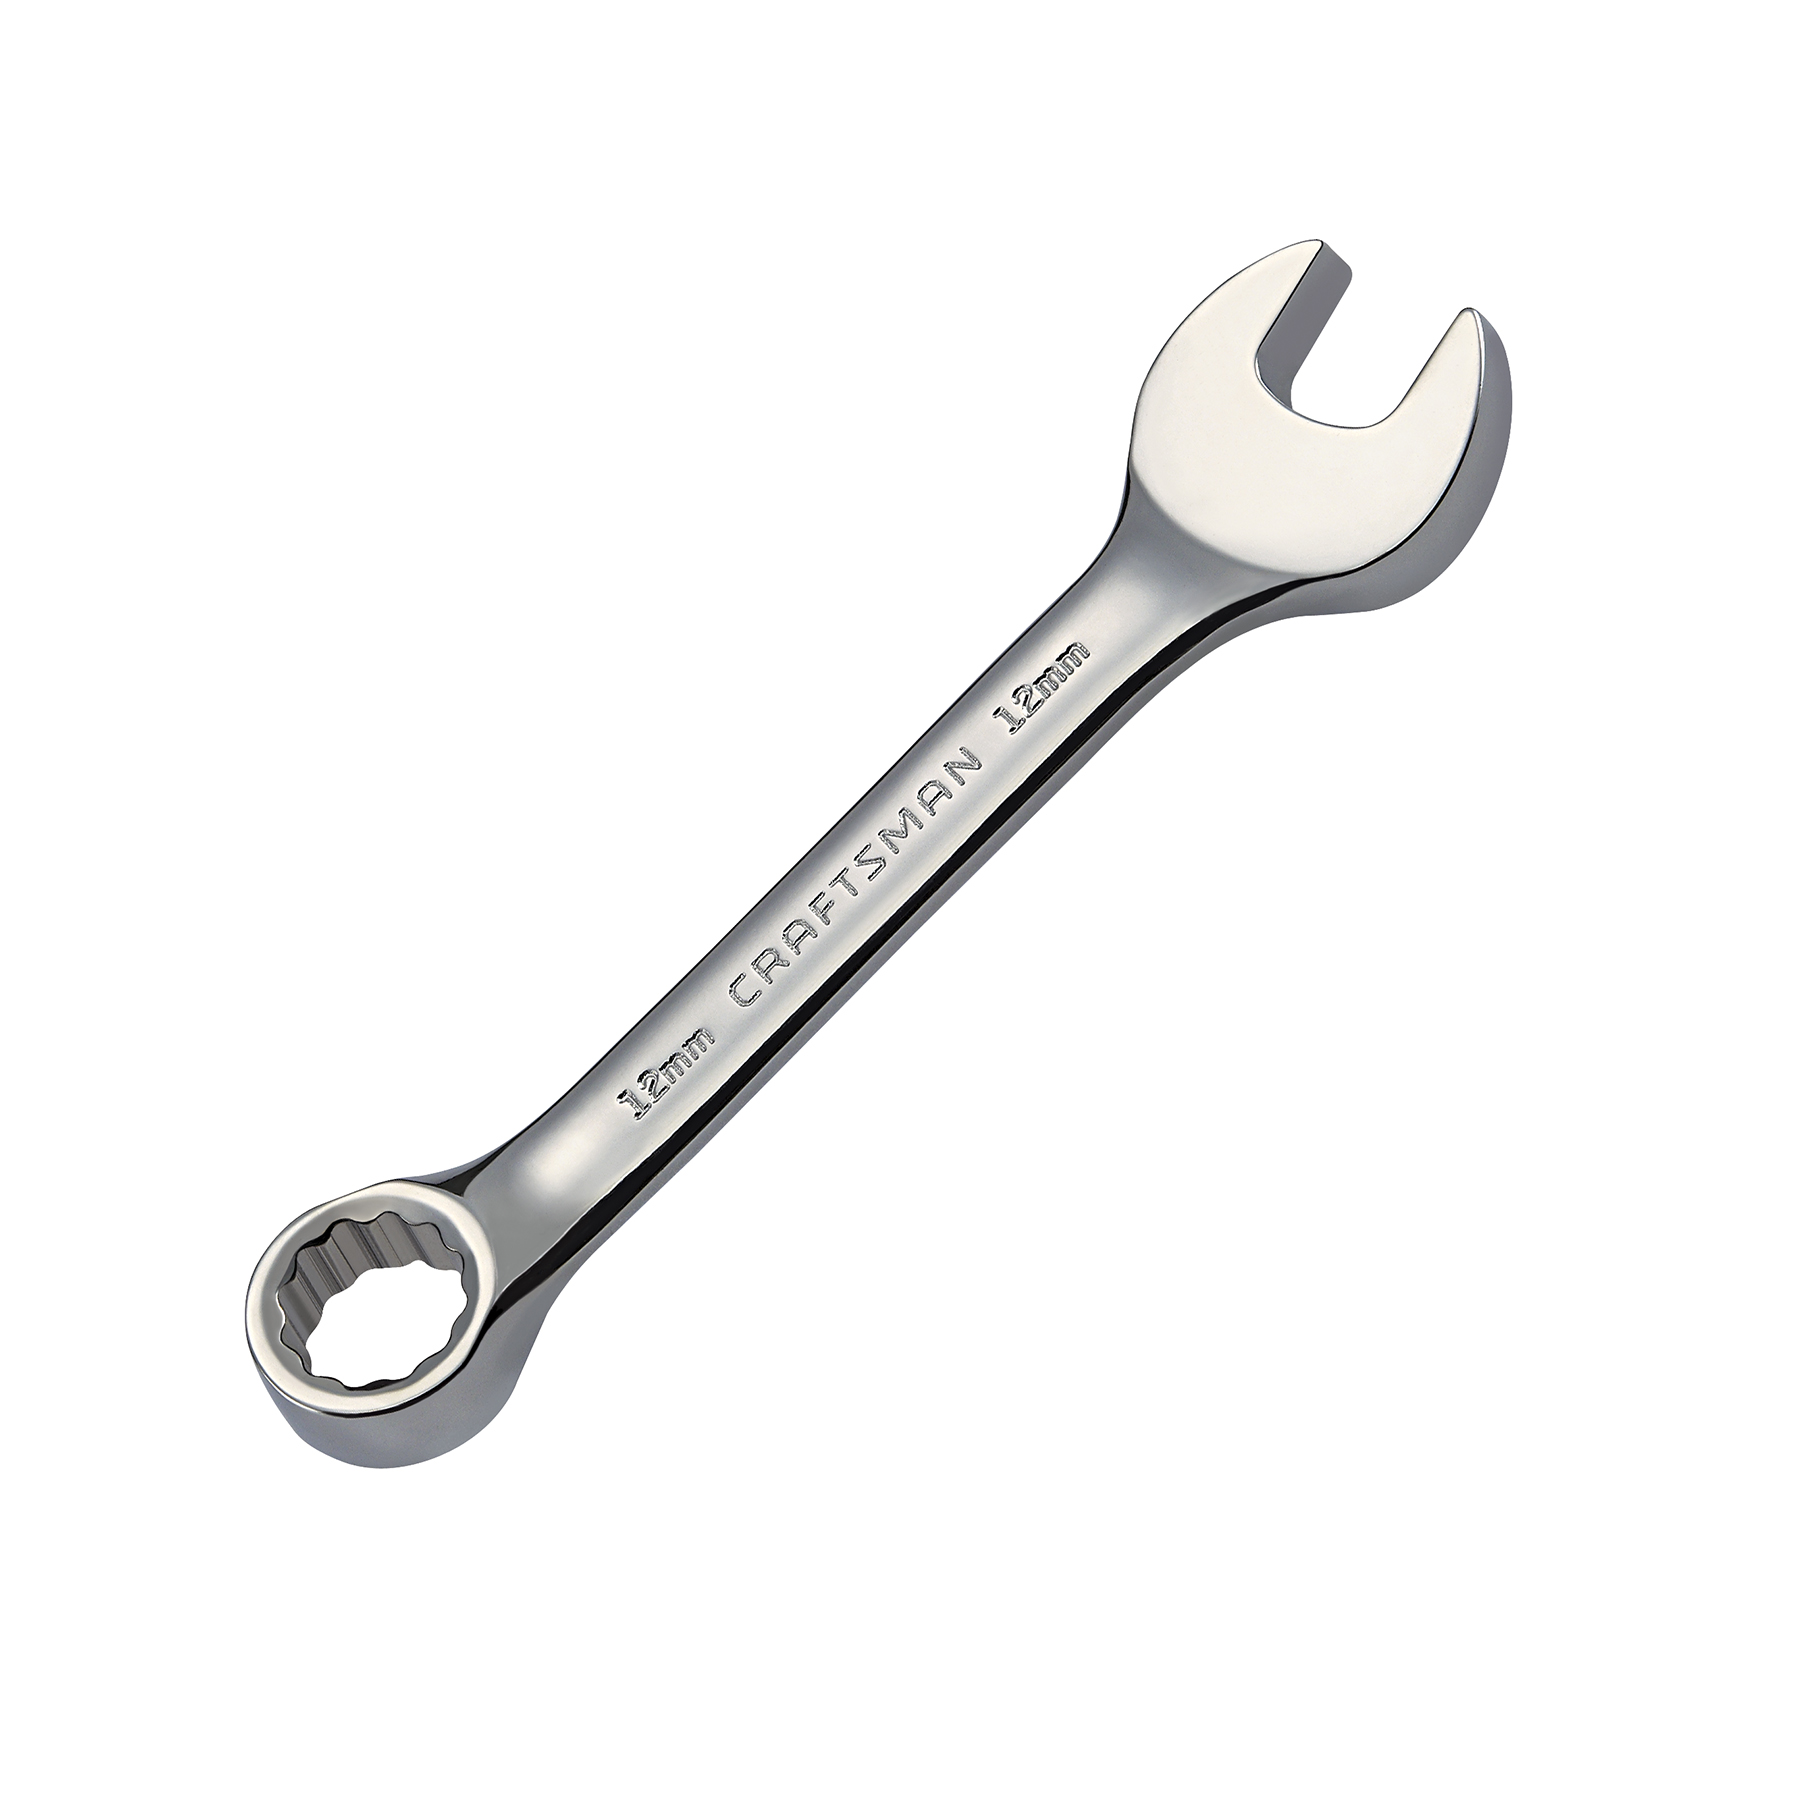 Craftsman 12mm Stubby 12 Point Combination Wrench